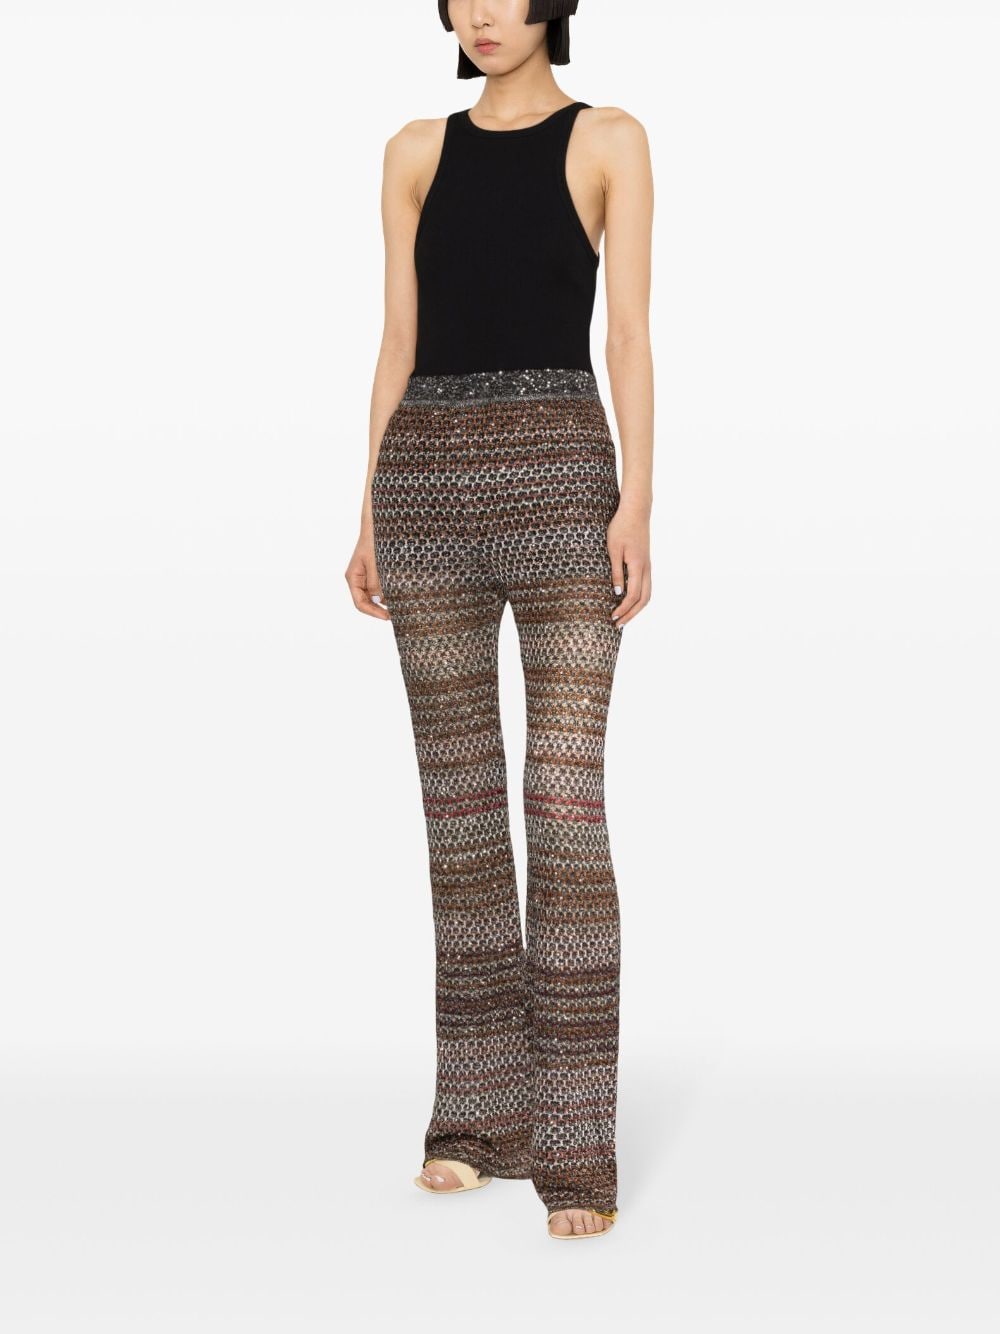 Flared Trousers: Black & Multicolor Metallic Honeycomb Knit & Sequin Embellished for Women